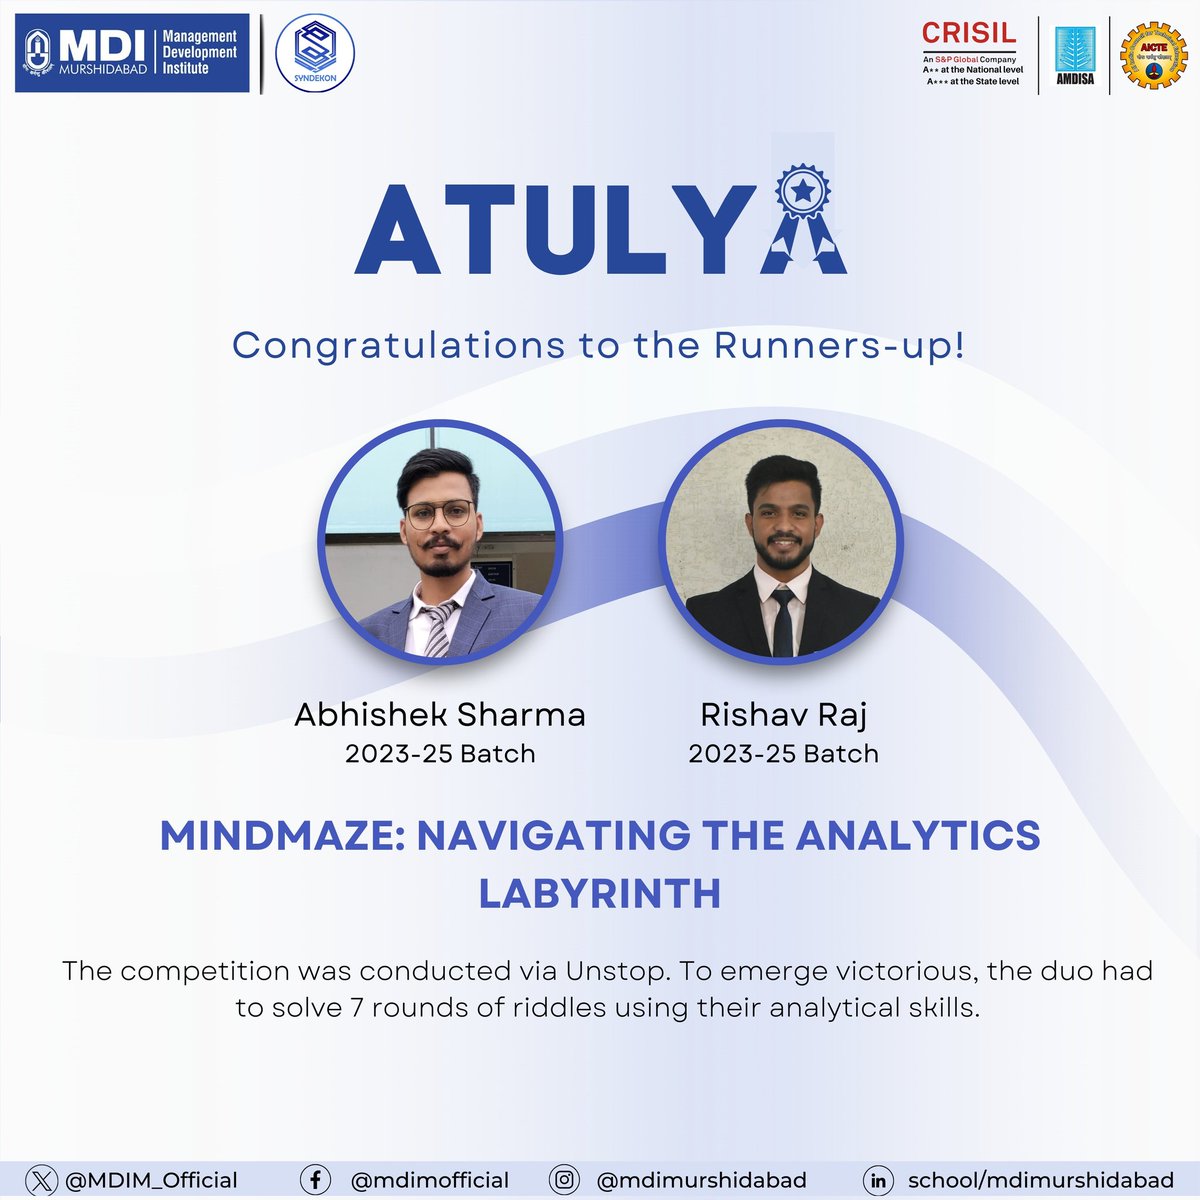 We are thrilled to present Abhishek Sharma and Rishav Raj of 2023-25 batch who have secured the Runners-up position in #Mindmaze: Navigating the Analytics labyrinth hosted via #Unstop. To emerge victorious, the duo had to navigate through 7 rounds of analytical riddles. #MDI #MBA